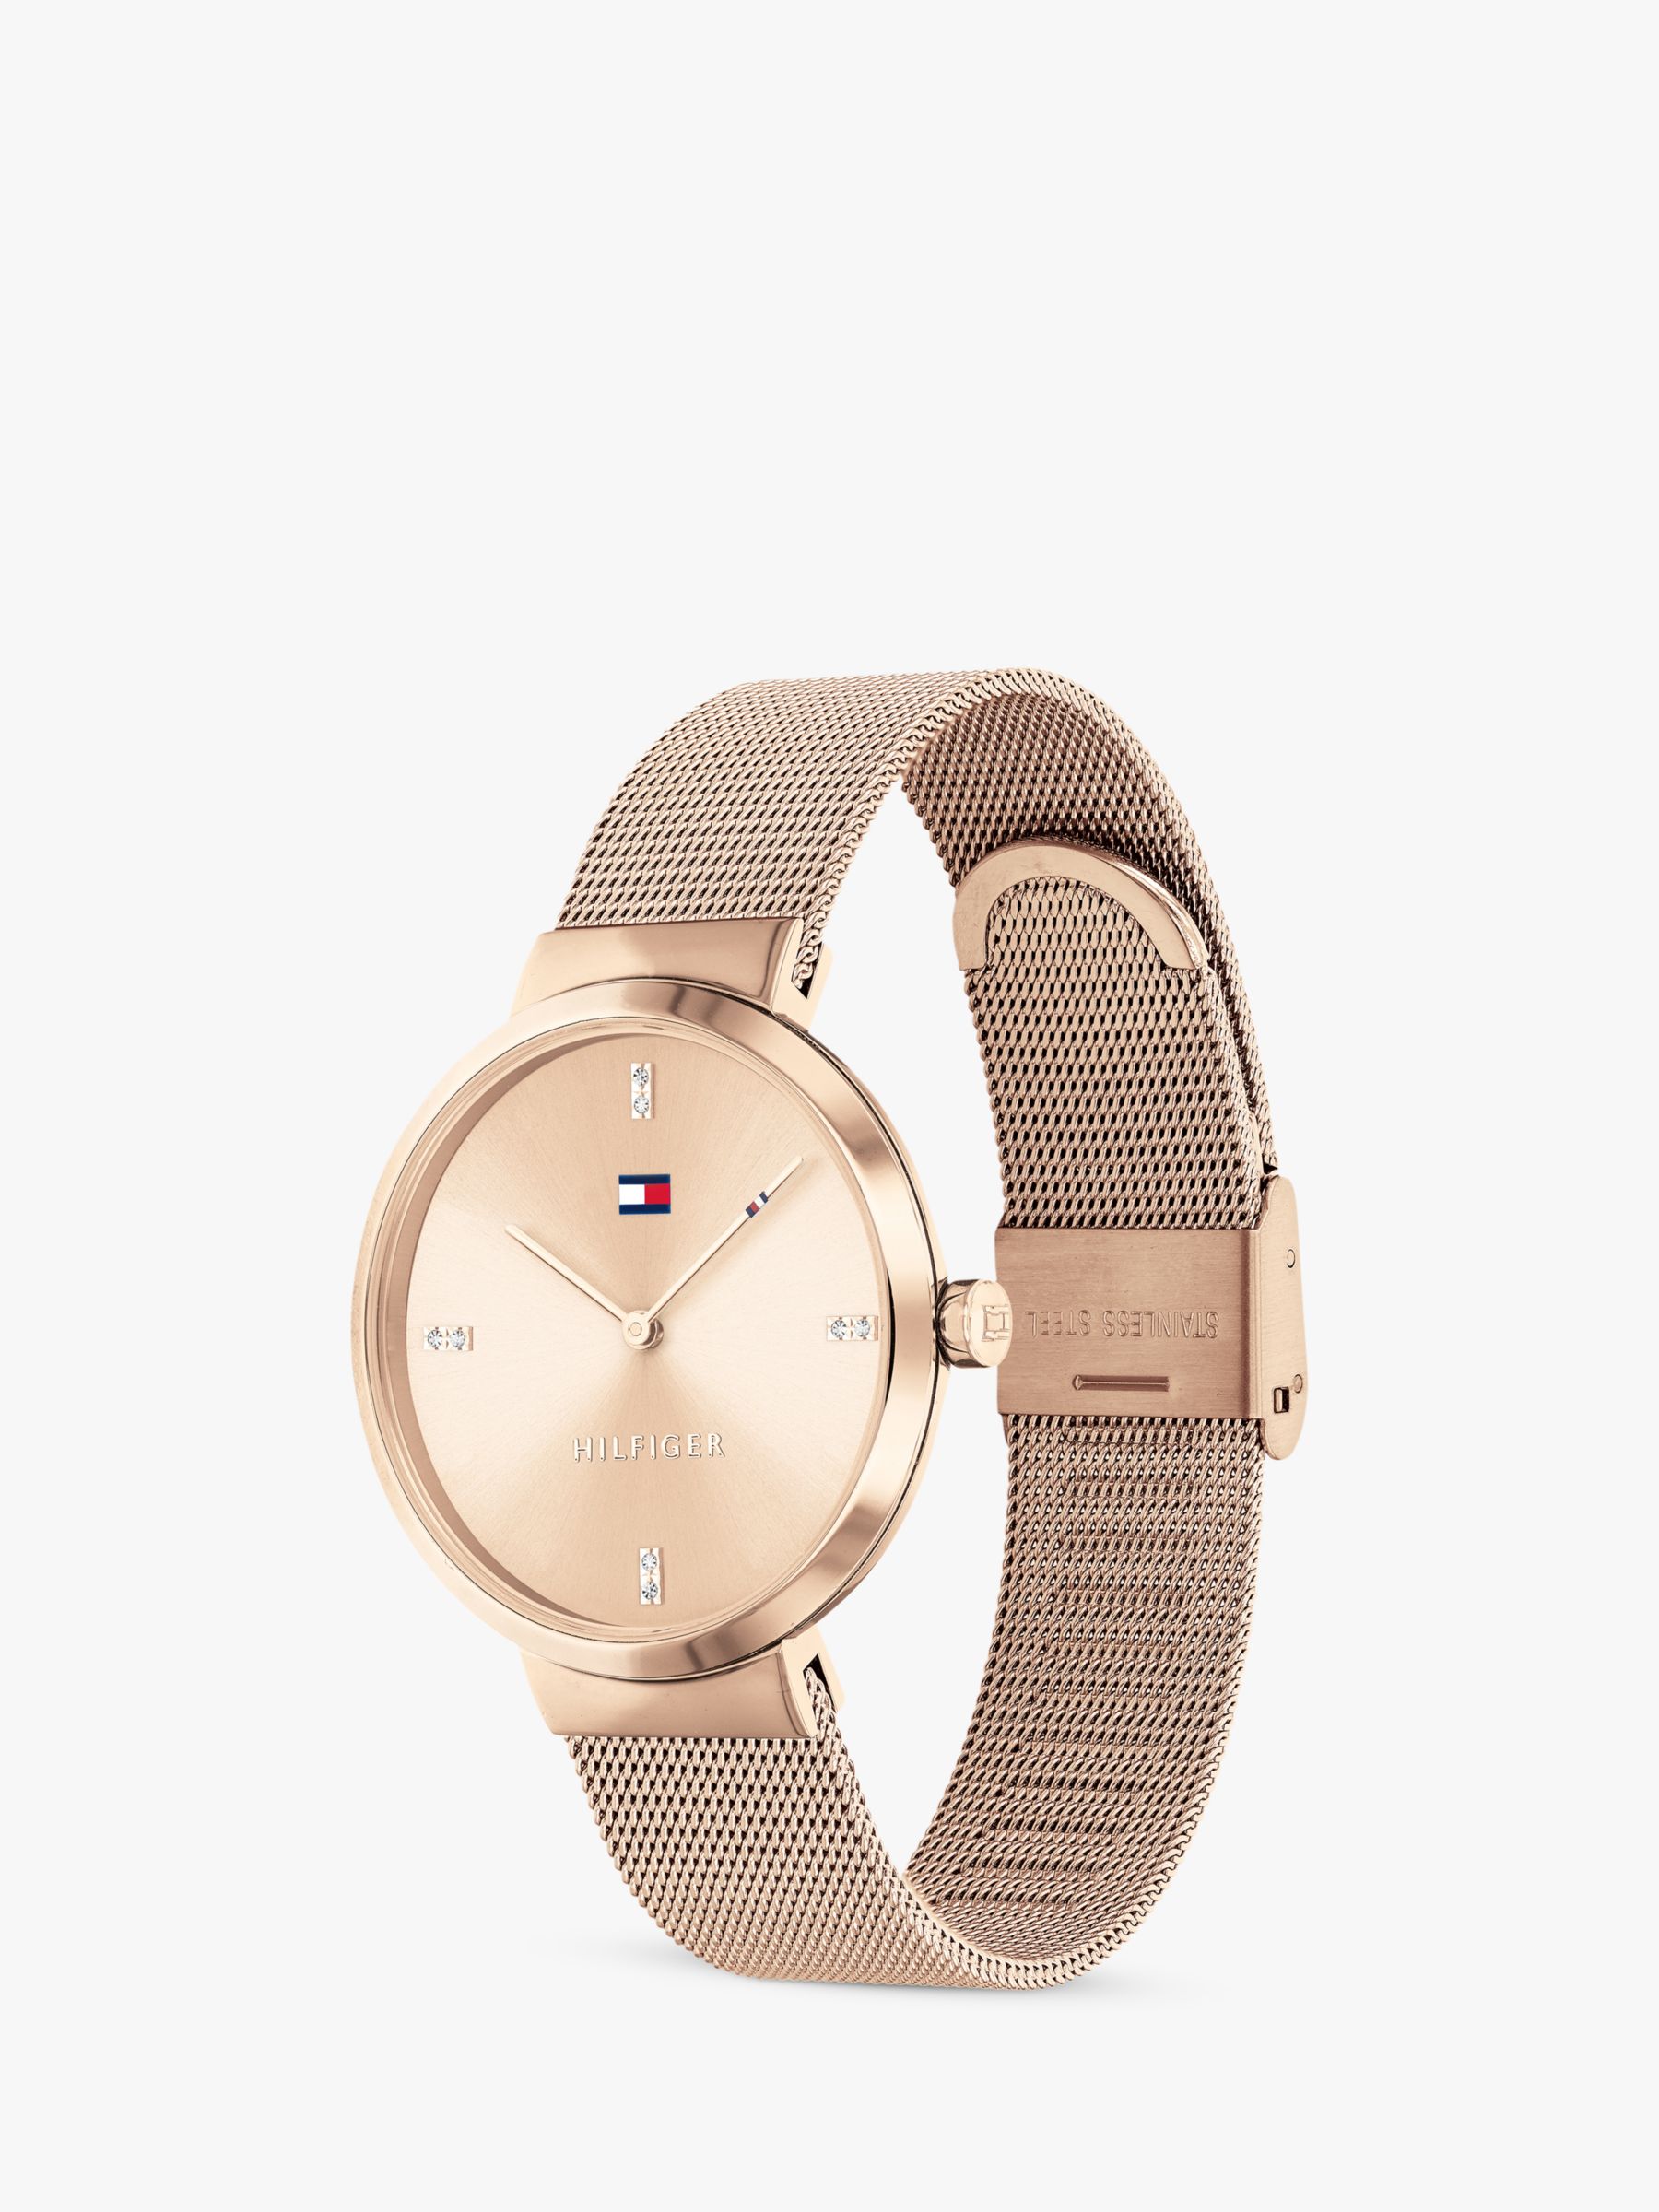 Casual Watch with Stainless Steel Mesh Bracelet | Tommy Hilfiger